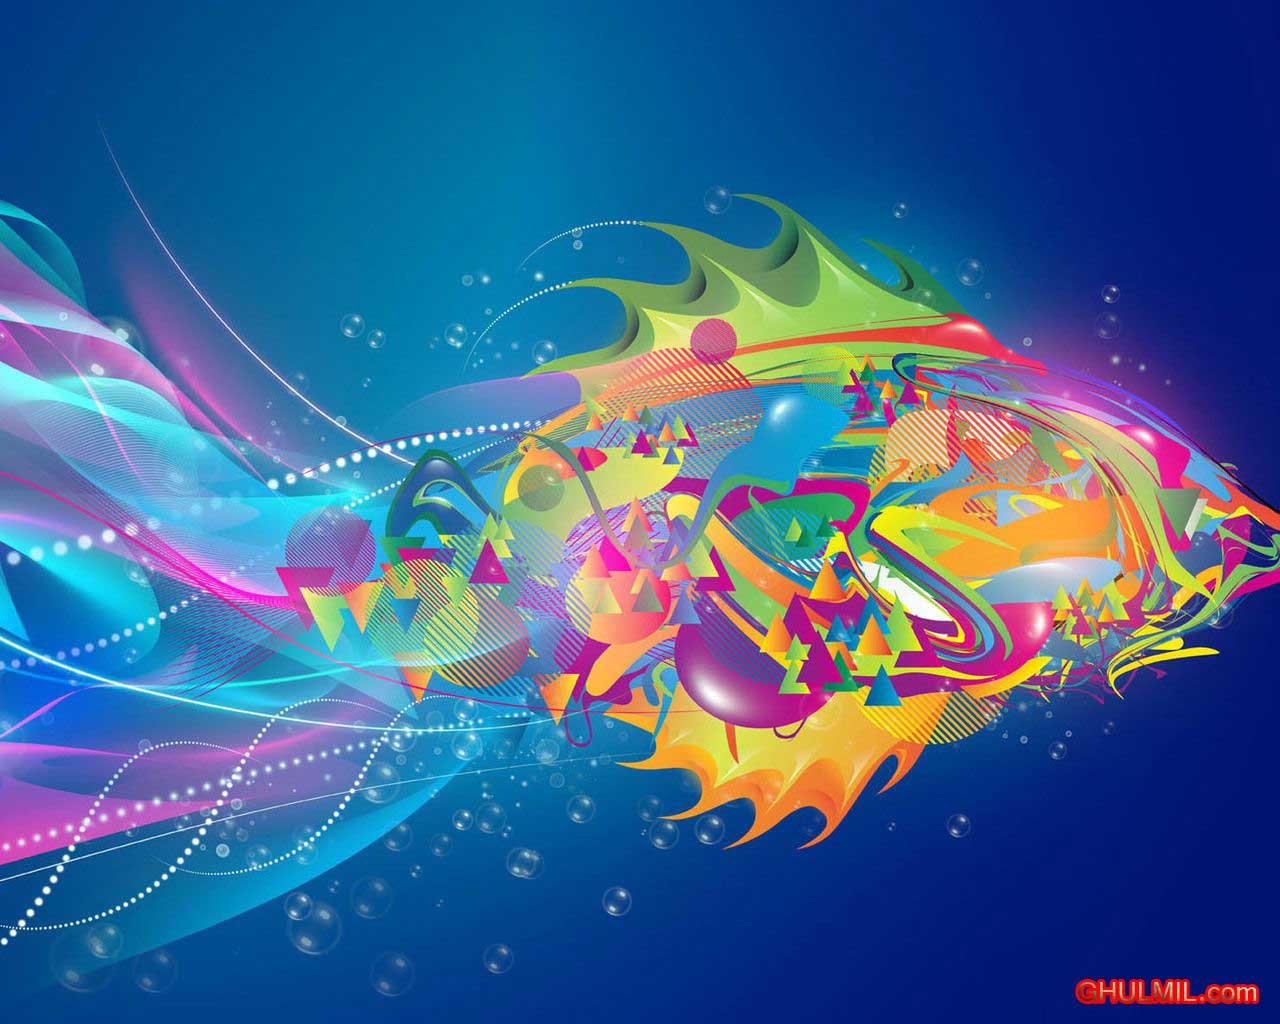 Download Free 3D Wallpapers For Pc - All Wallpapers New